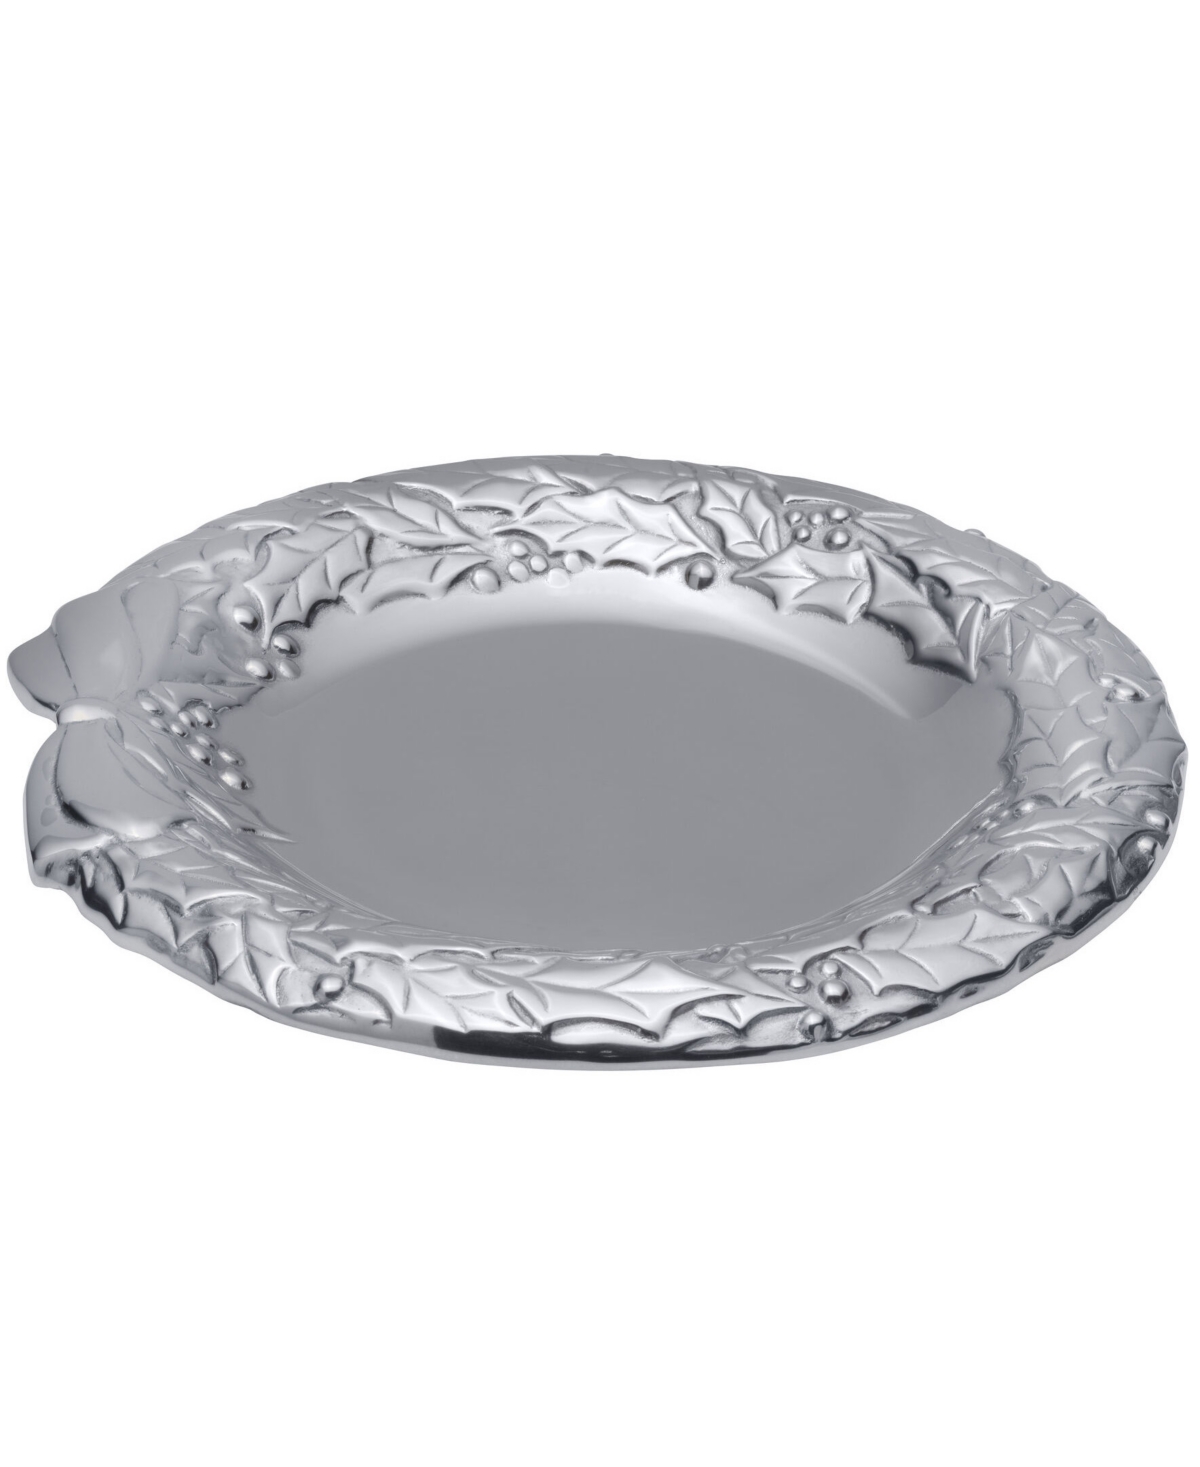 Shop Wilton Armetale Holly Berries Round Wreath Tray In Silver